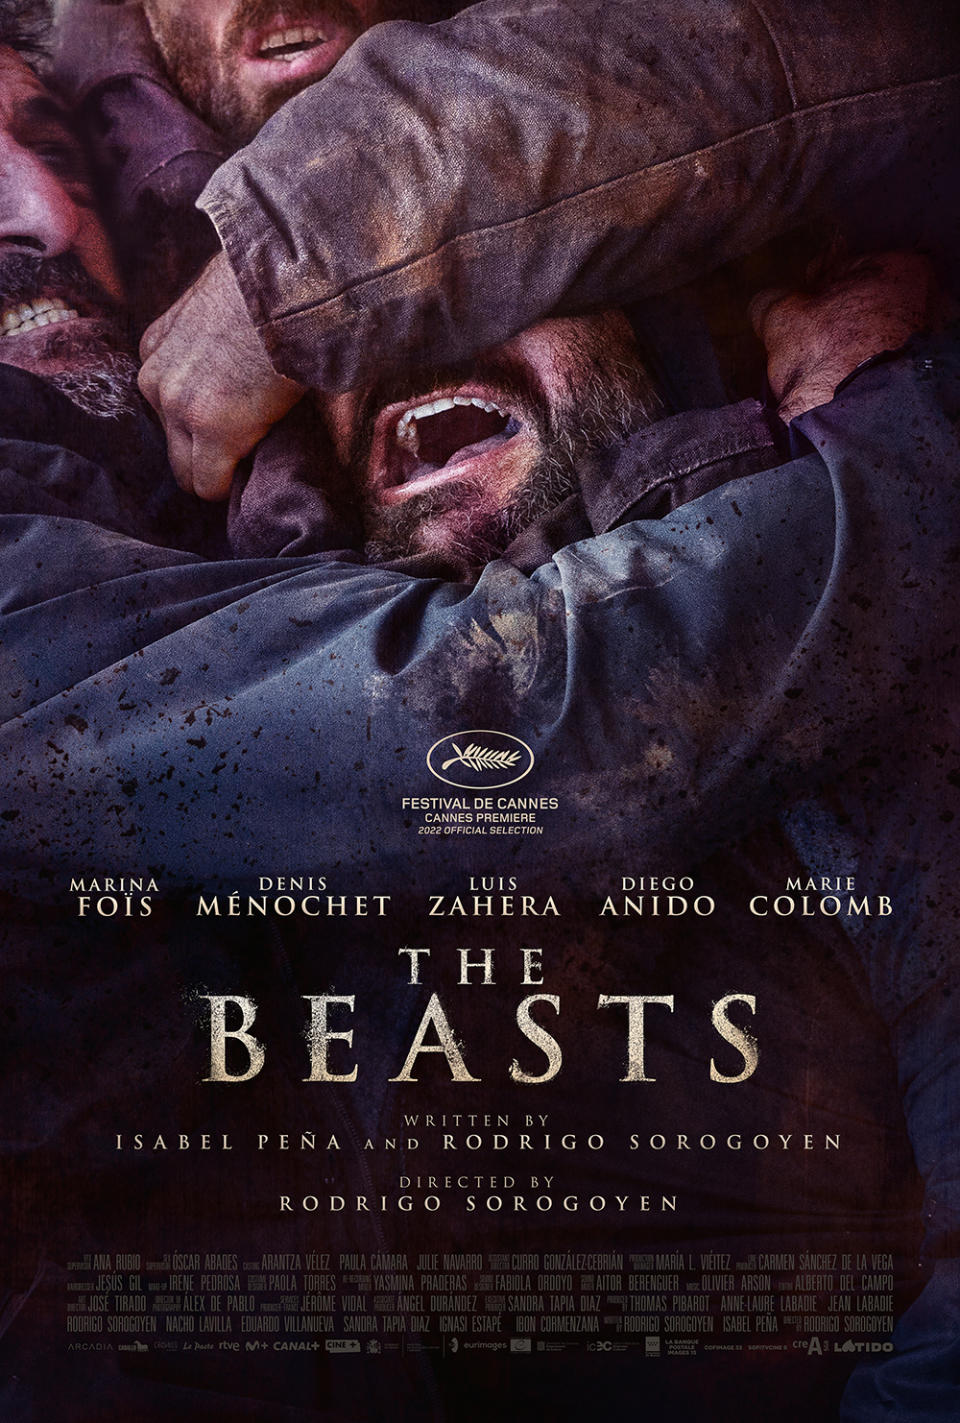 The Beasts Poster - Credit: Credit: Latido Films